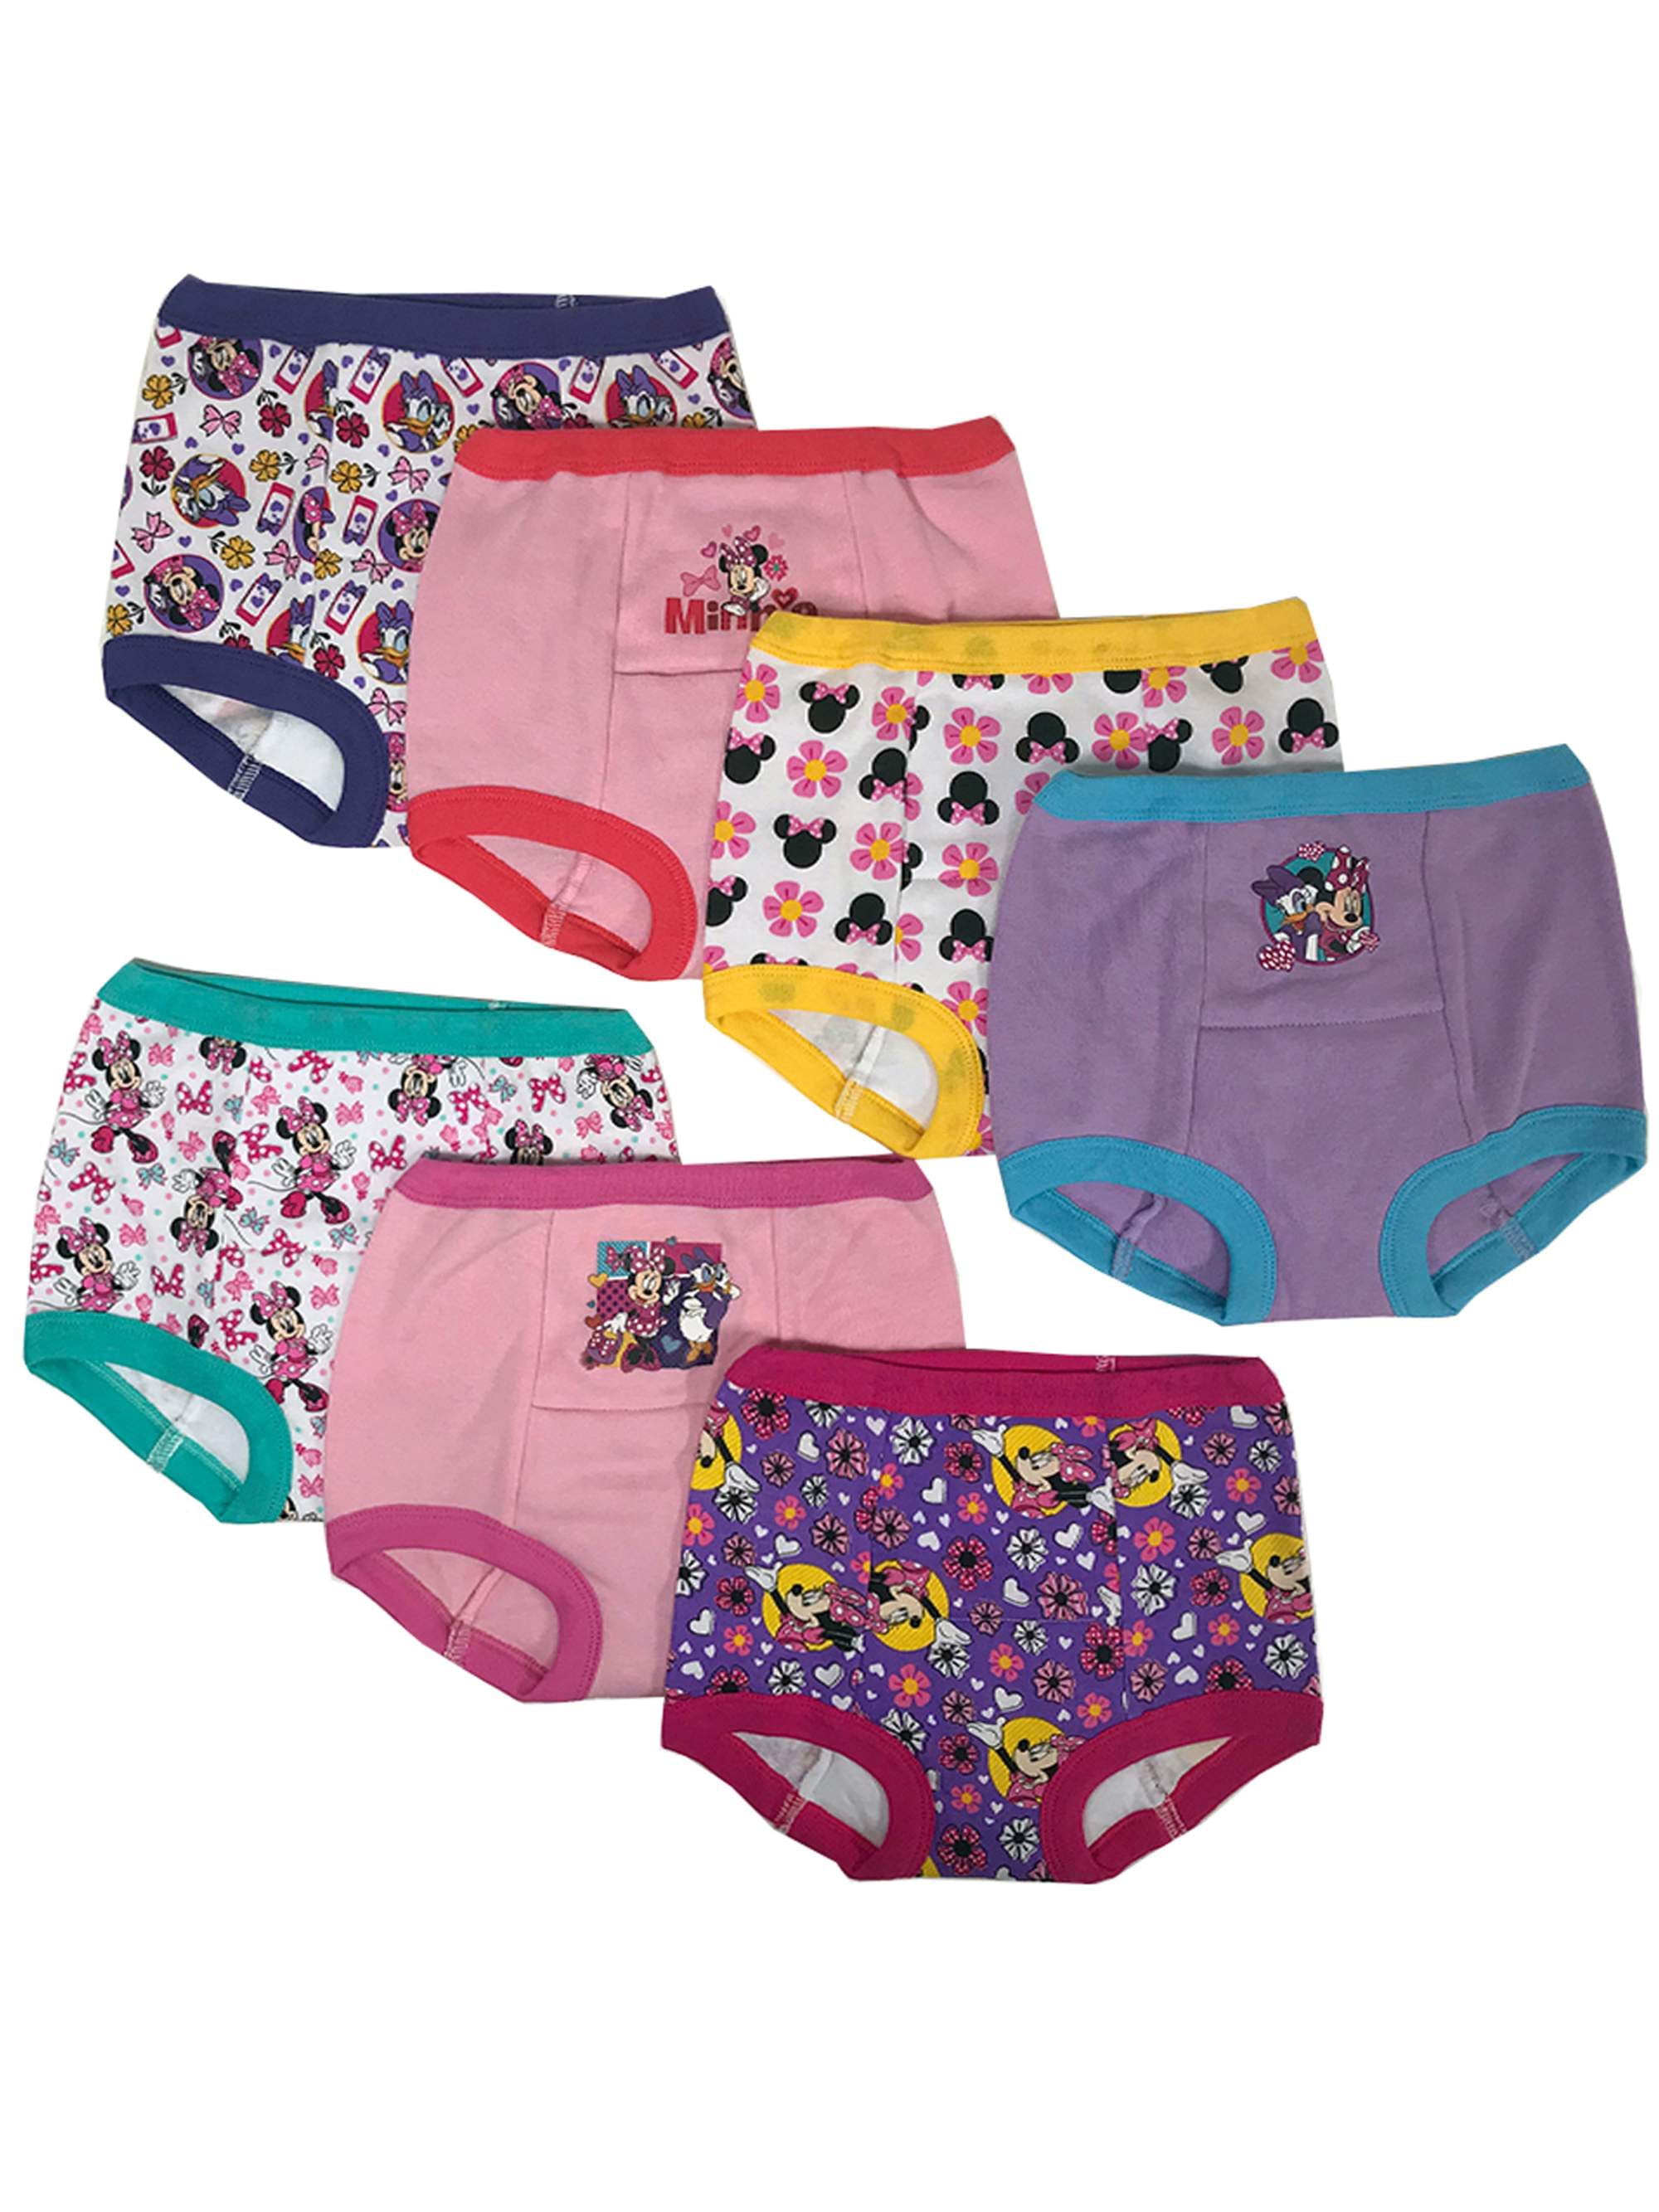 P) Minnie Mouse Toddler Girl Training Underwear, 7-Pack, Sizes 18M-4T 